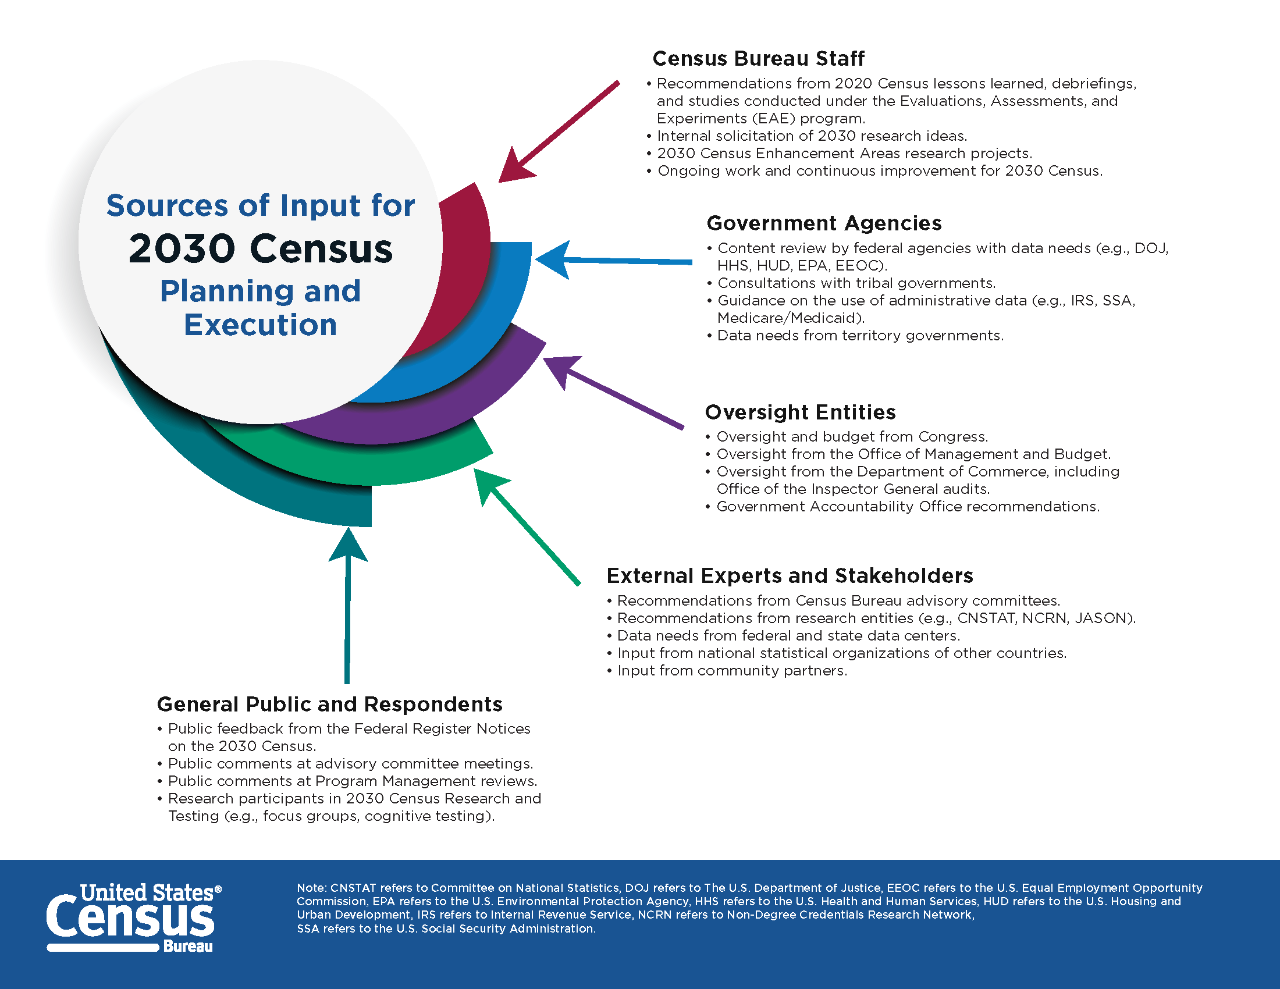 Sources of Input for 2030 Census Planning and Execution